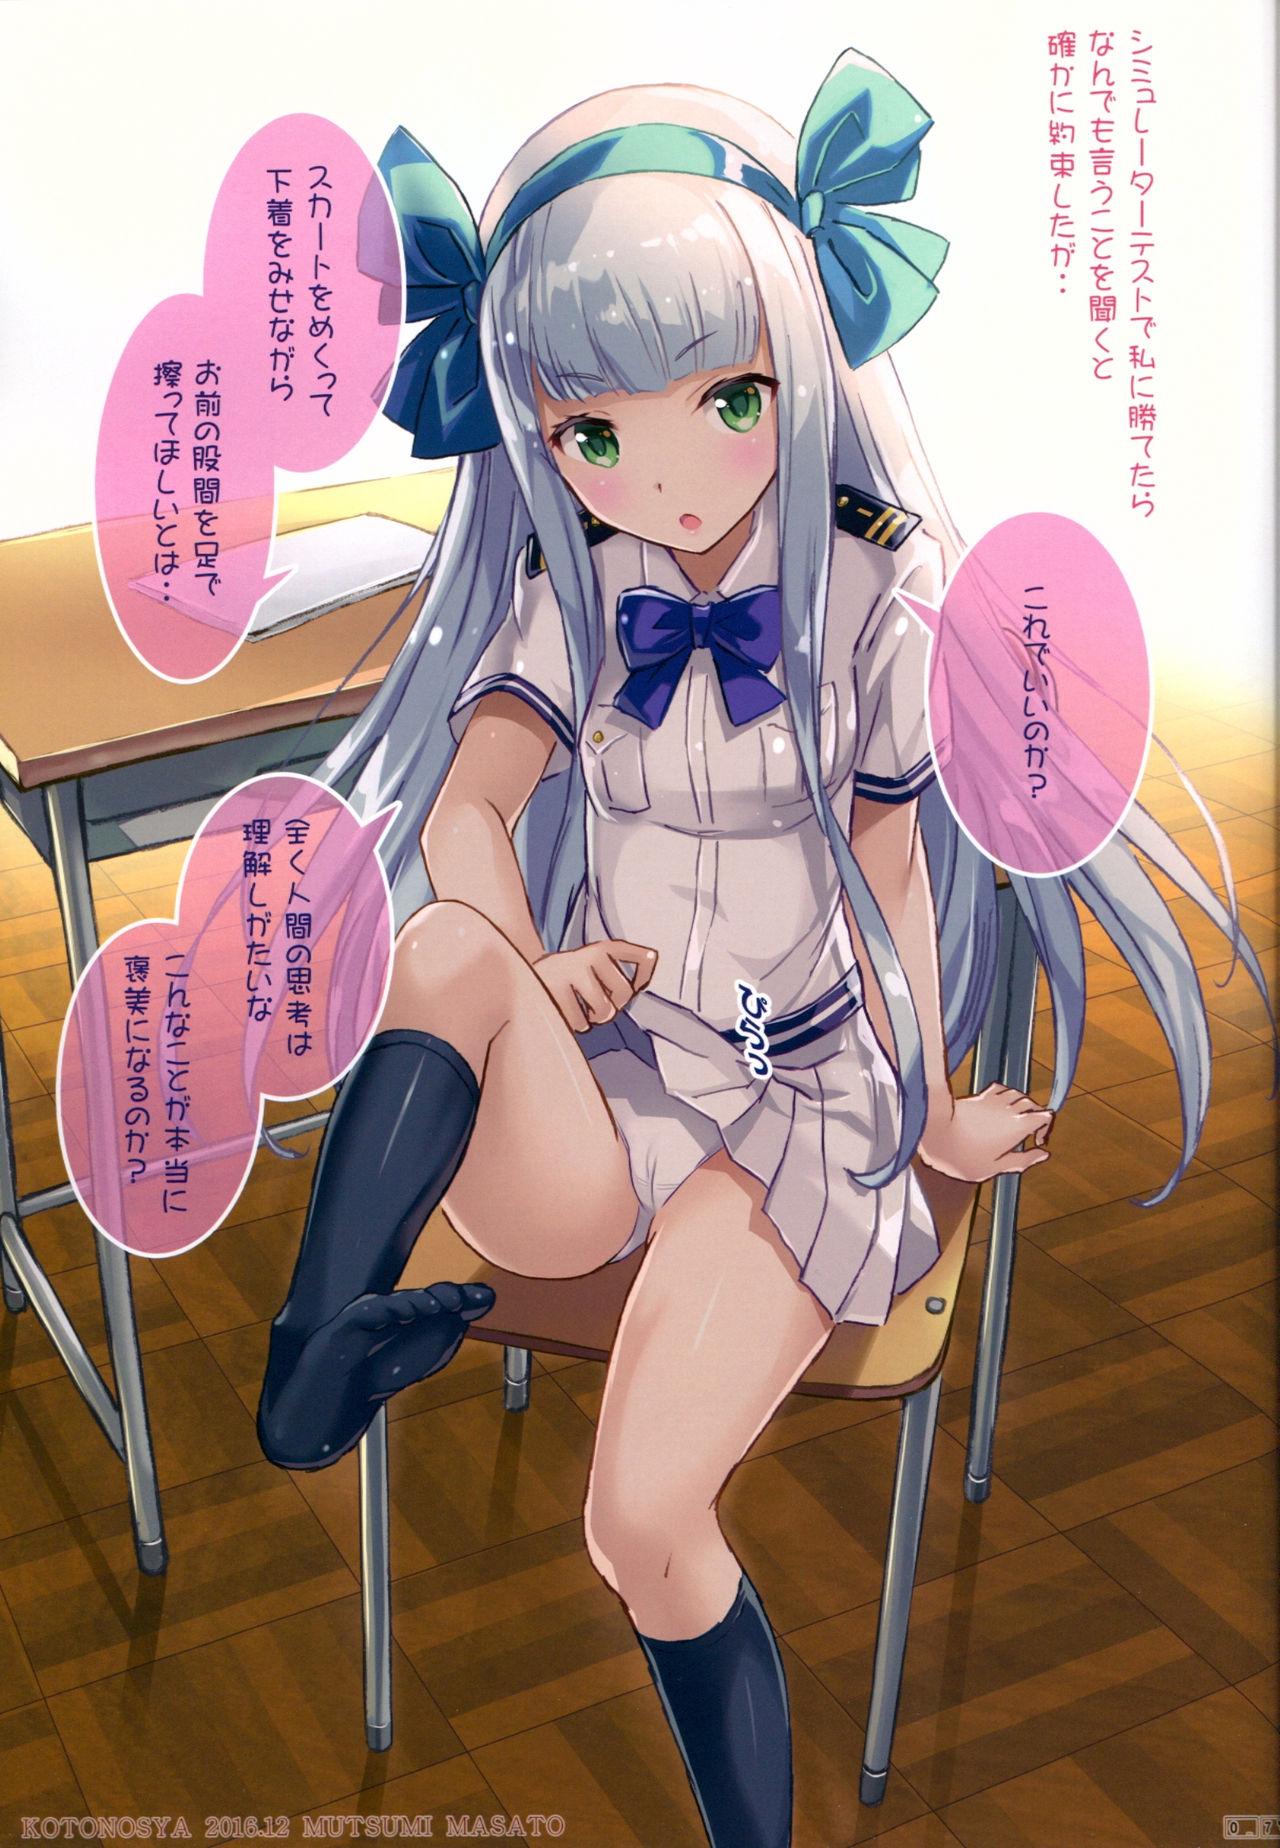 Vadia TAKAO OF BLUE STEEL 06 - Arpeggio of blue steel Sexy Whores - Page 6